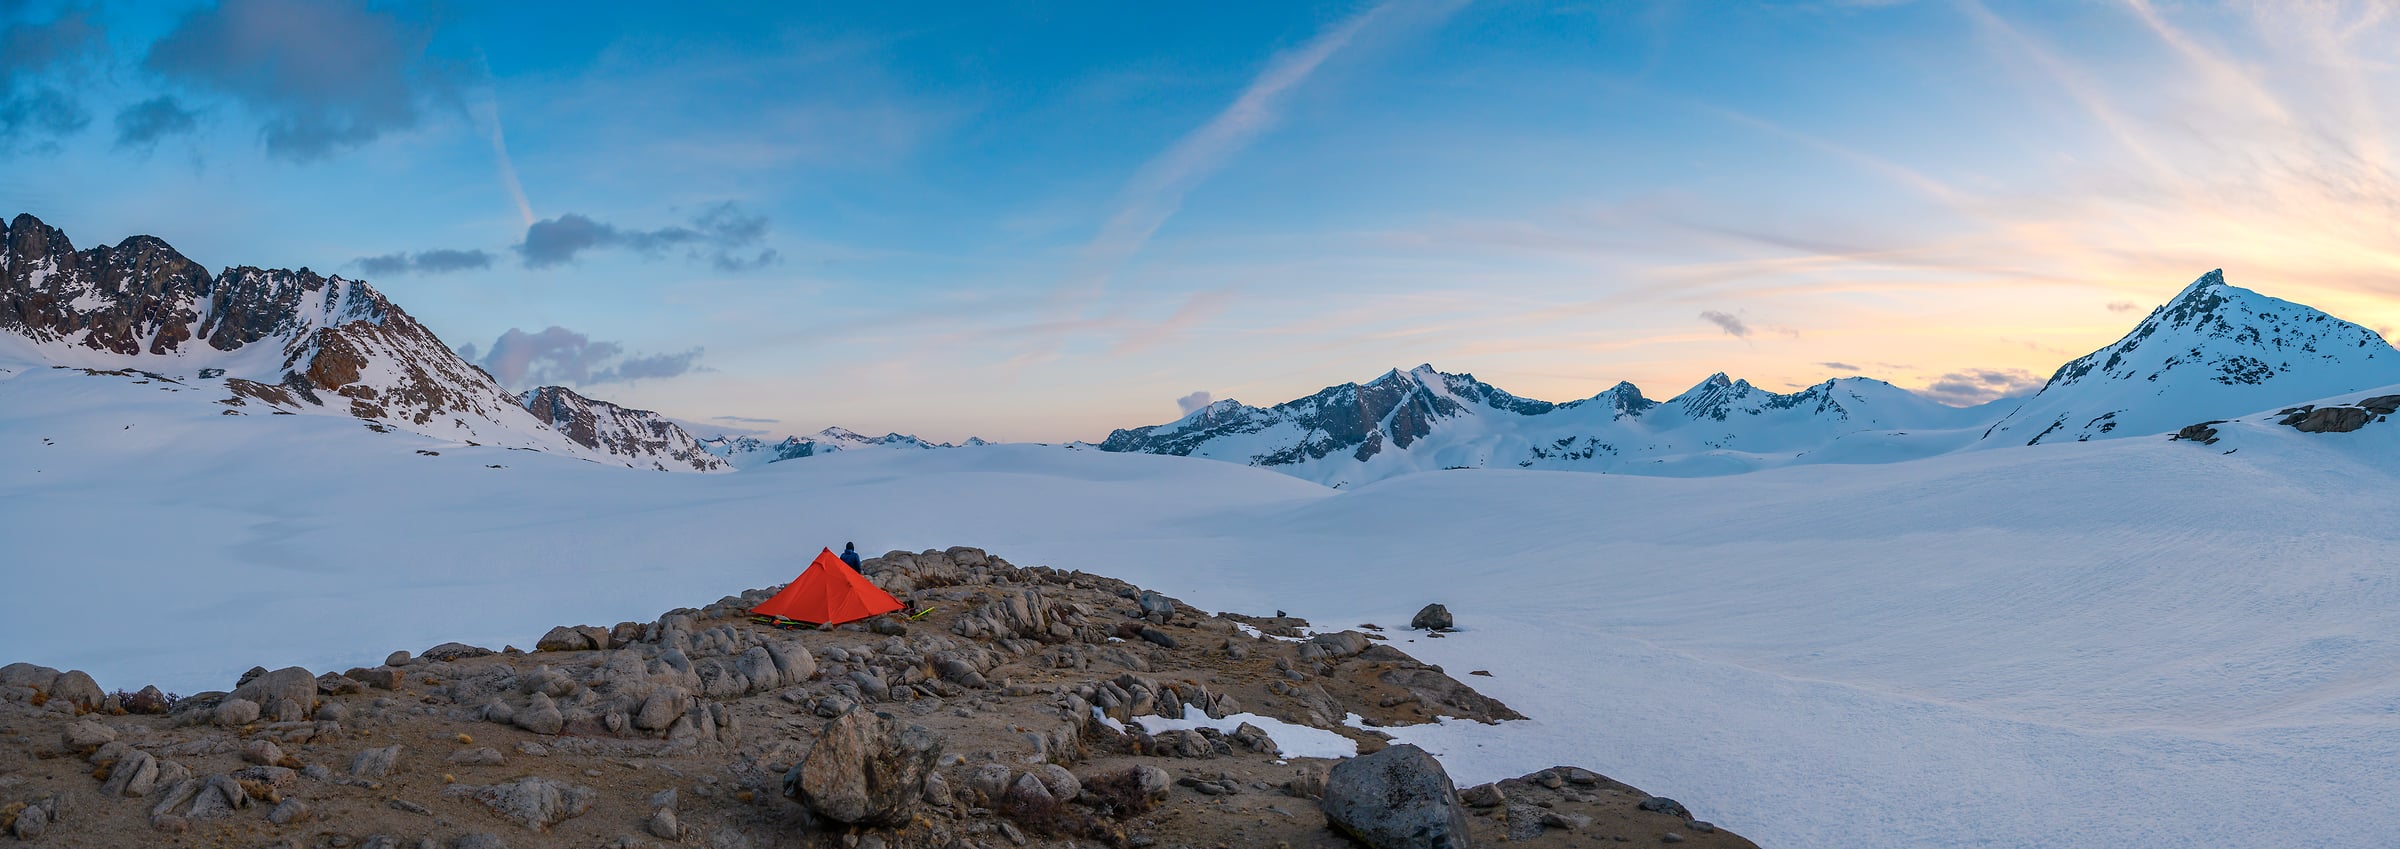 197 megapixels! A very high resolution, panorama photo of a red tent amid snowy mountains at sunset; camping photograph created by Scott Rinckenberger in the Upper Basin, Kings Canyon National Park, California.